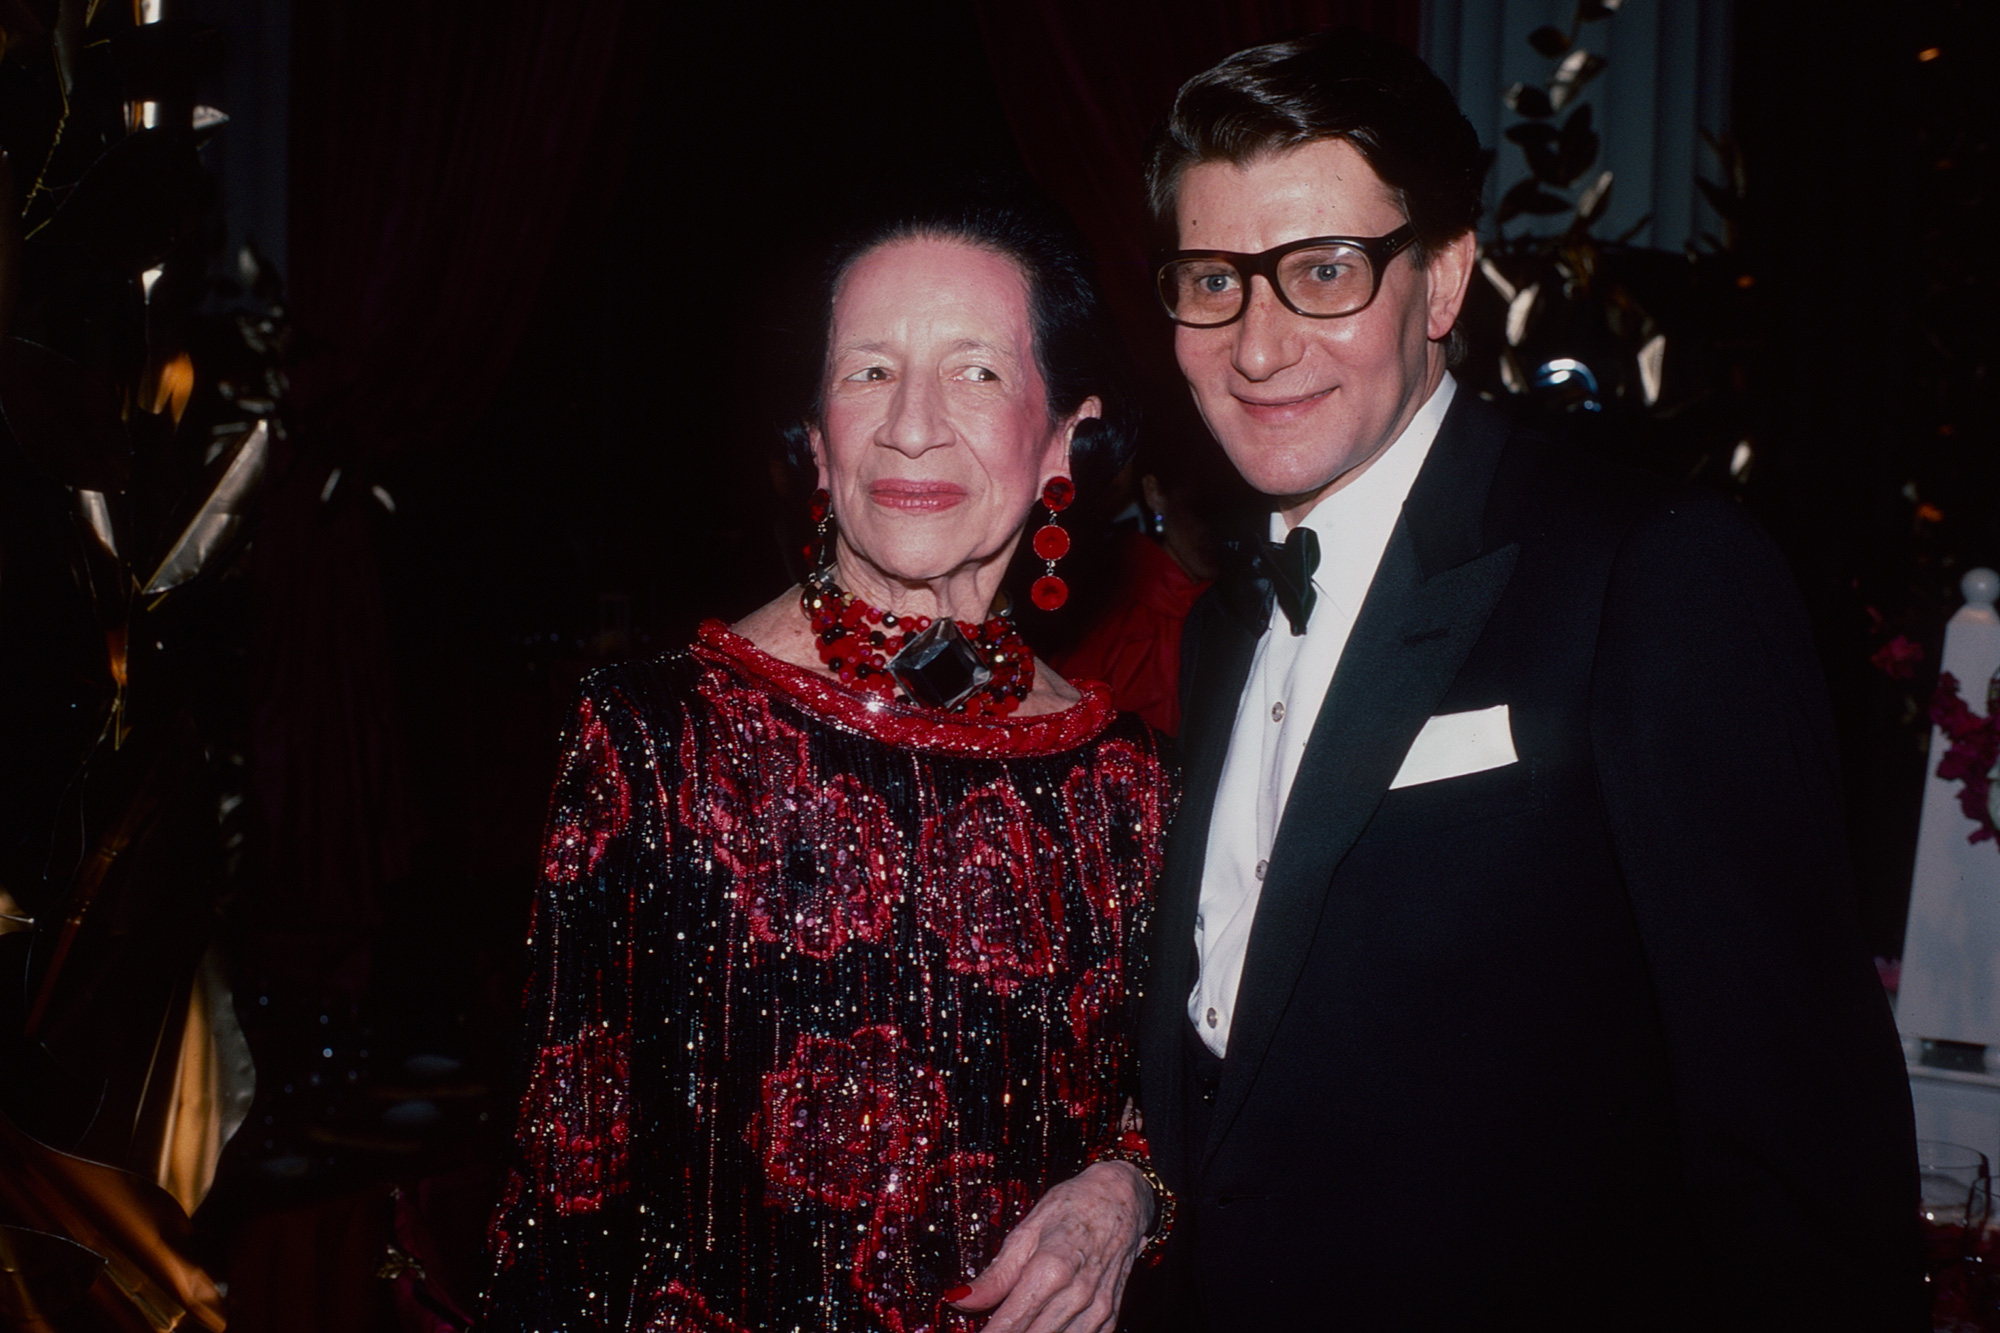 Former Vogue editor Diana Vreeland and fashion designer Yves Saint Laurent attend the 1983 Met Gala, celebrating the Costume Institute's exhibition "Yves Saint Laurent: 25 Years of Design."